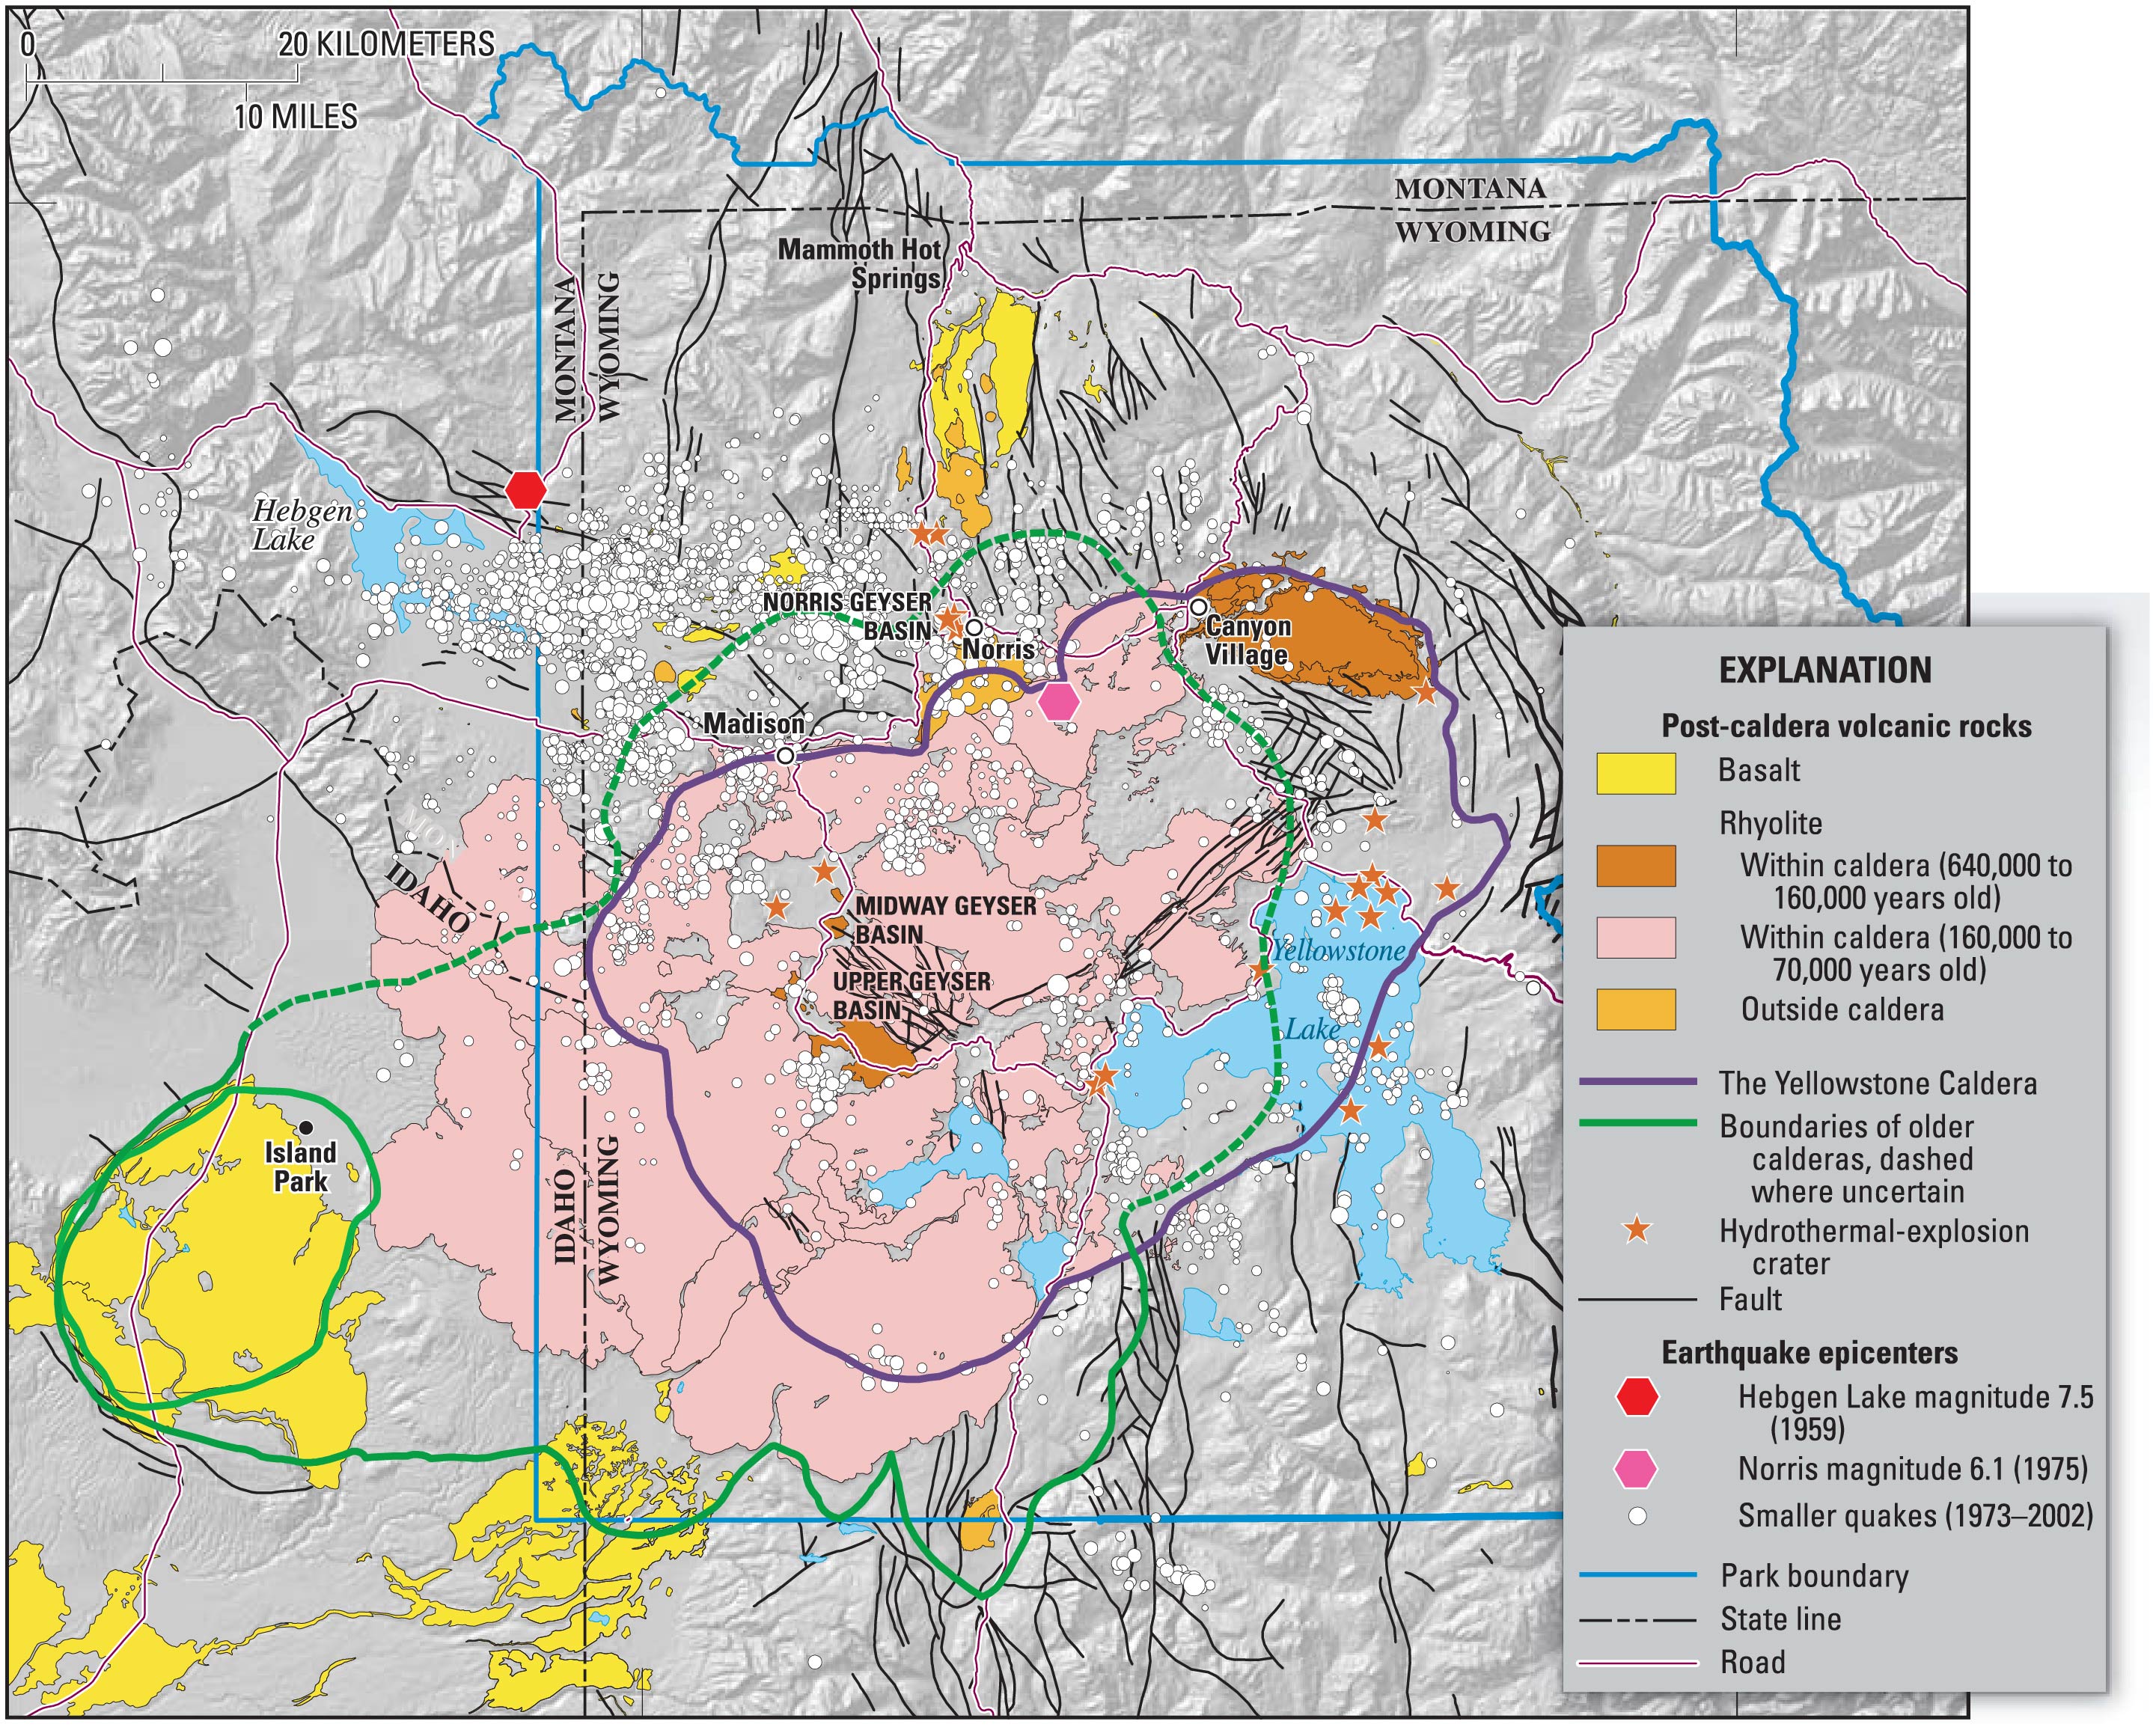 A map of the overlapping calderas, lava flows and potential hazards